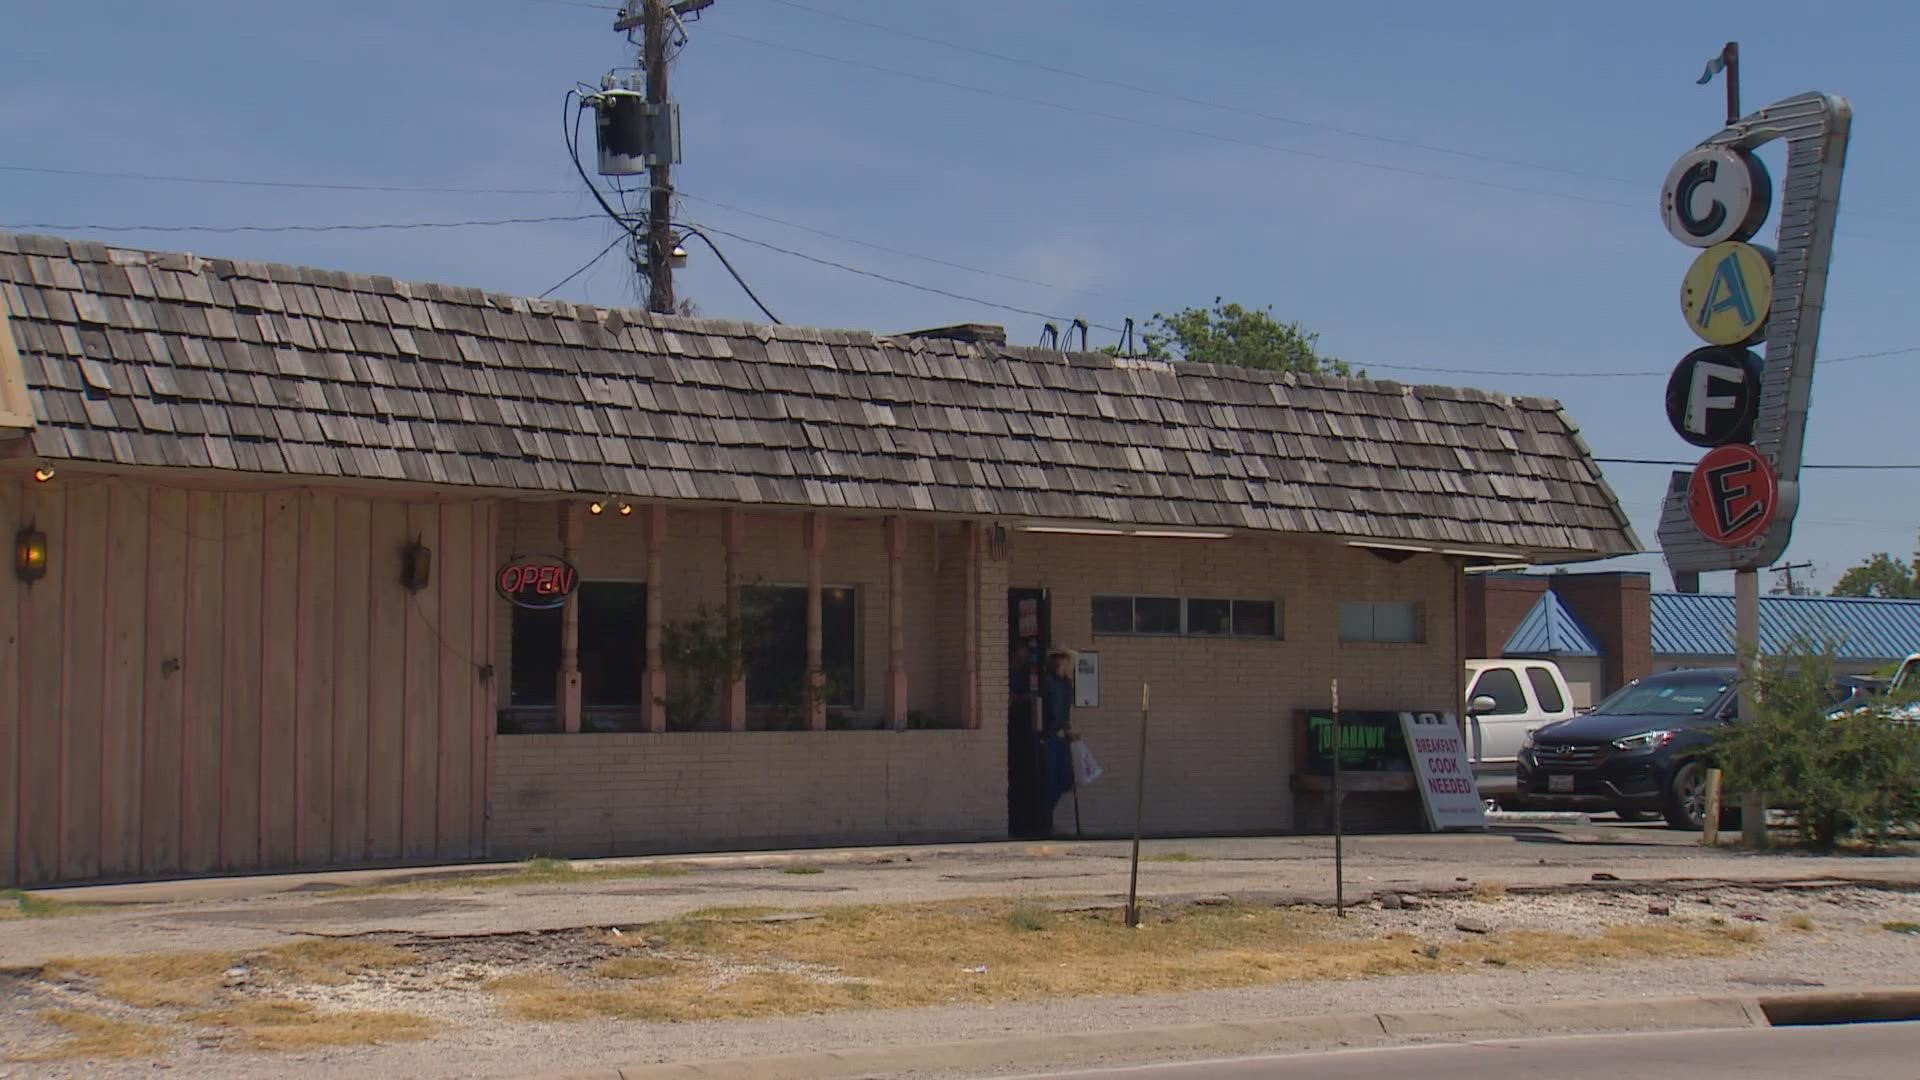 Bill Smith's Cafe in McKinney will close its doors after a good 66-year run. The breakfast and lunch cafe started in 1956 with Bill's father and mother.